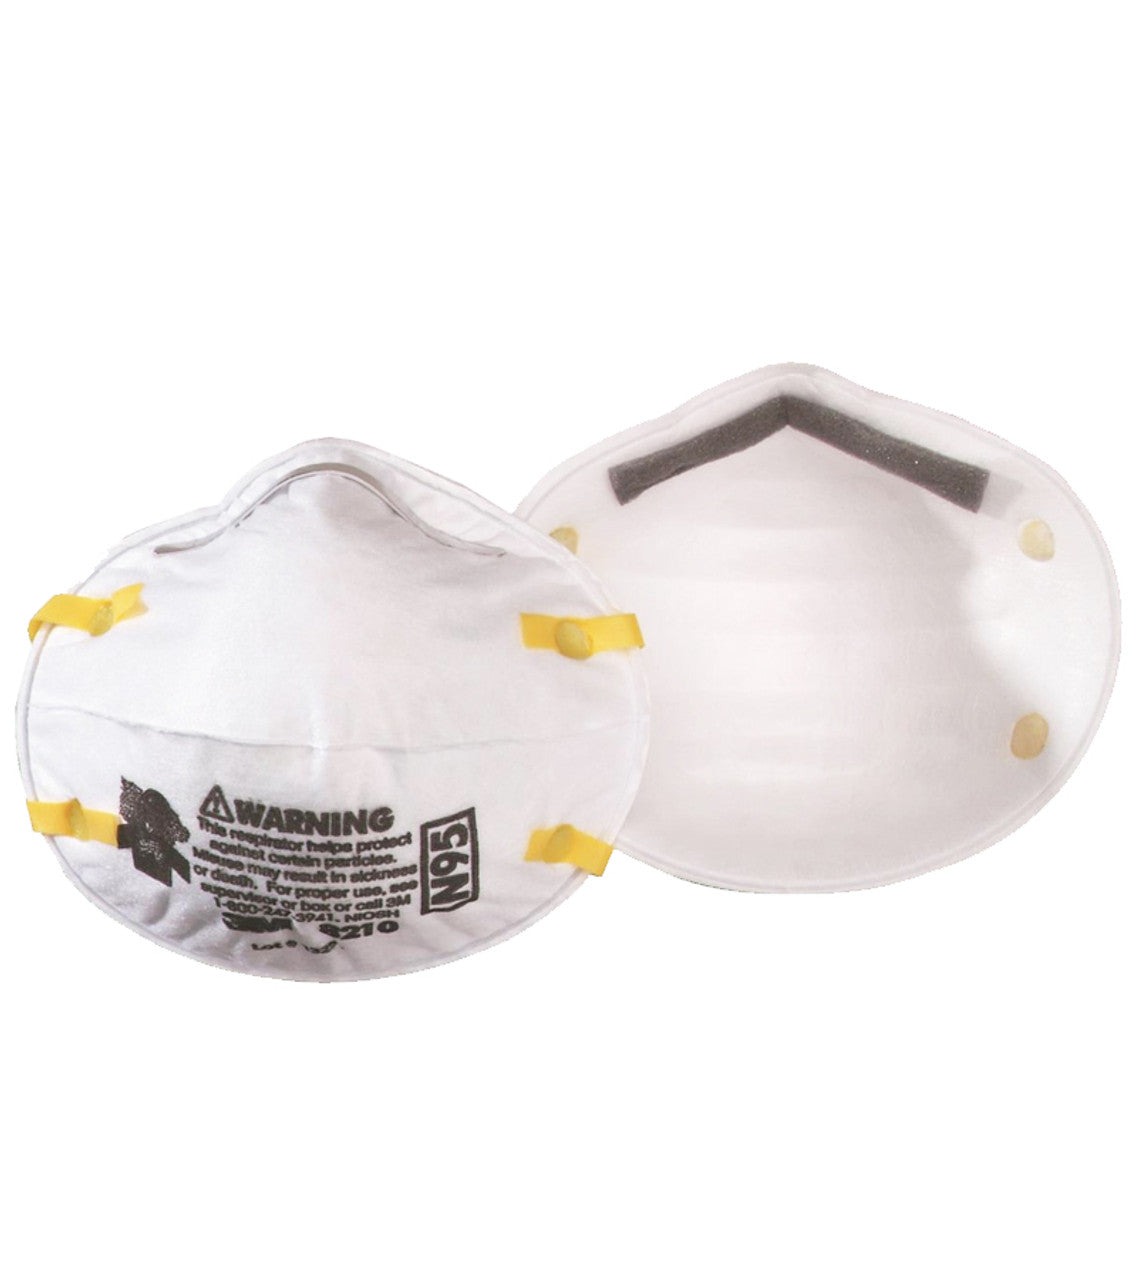 3M™ Electrostatic Filter Respirator Mask Sold by the box (20 per box)